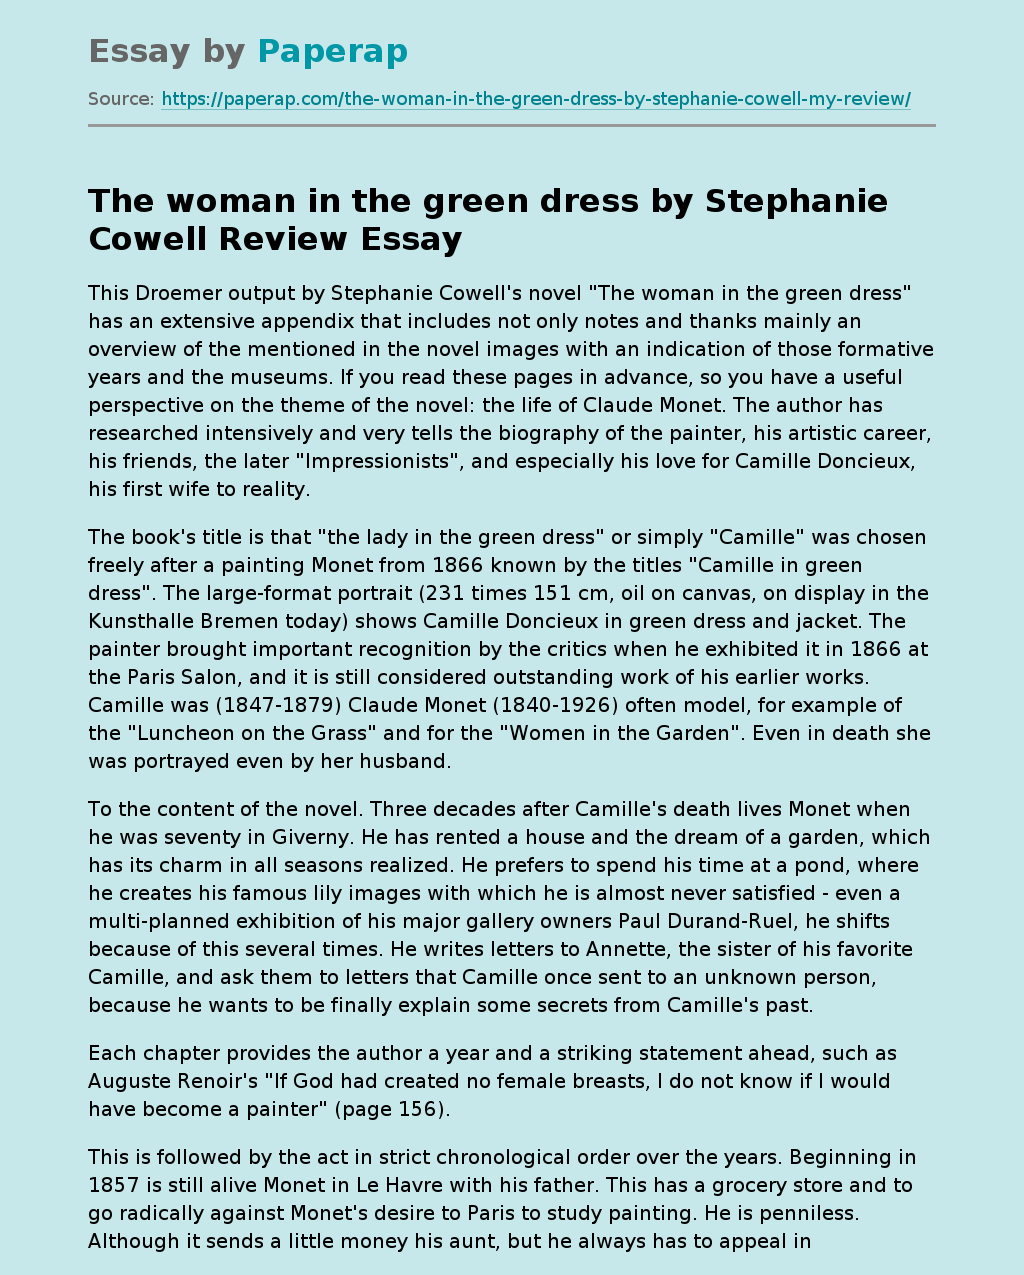 “The Woman in the Green Dress” by Stephanie Cowell